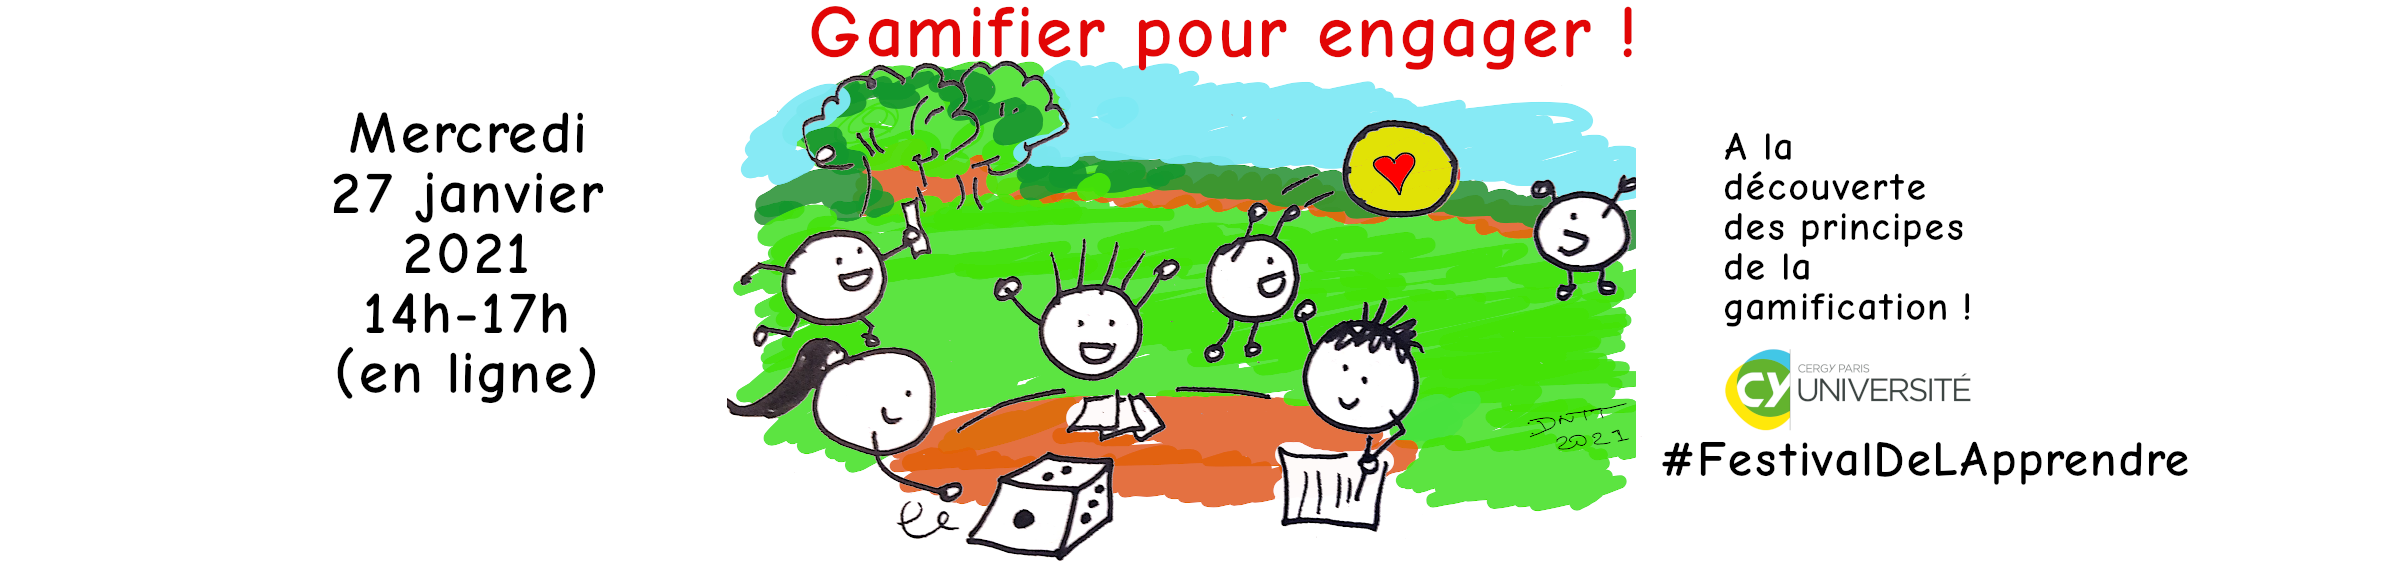 Gamifier pour engager